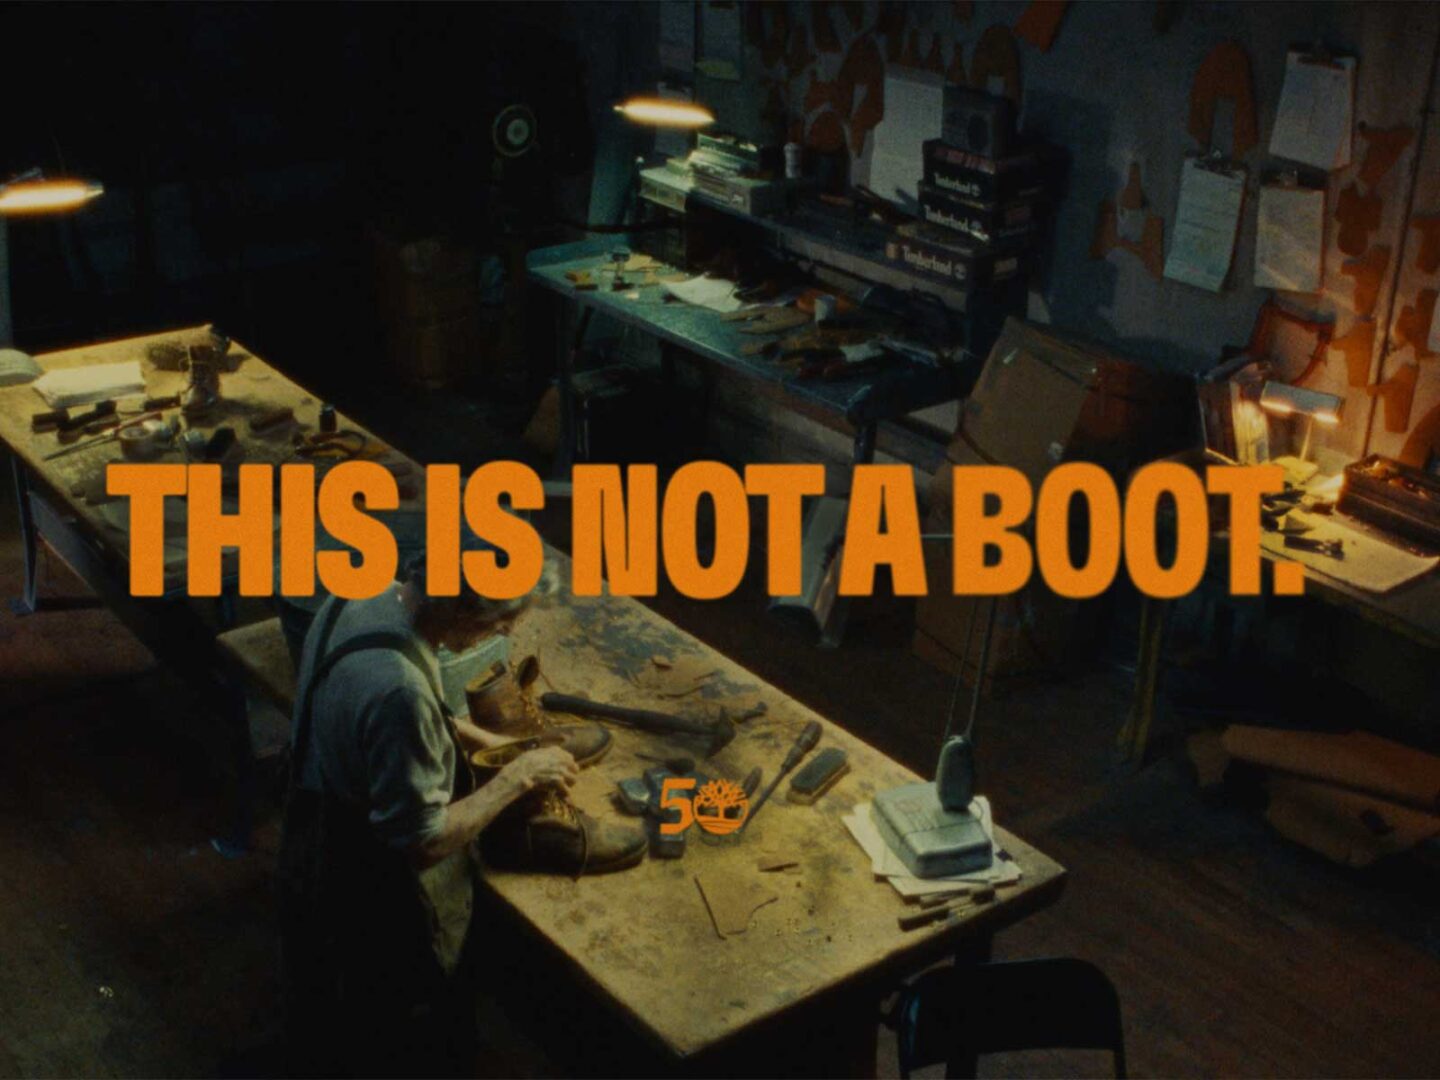 Timberland presents the documentary “This is Not a Boot: The Story of an Icon” on its 50th Anniversary